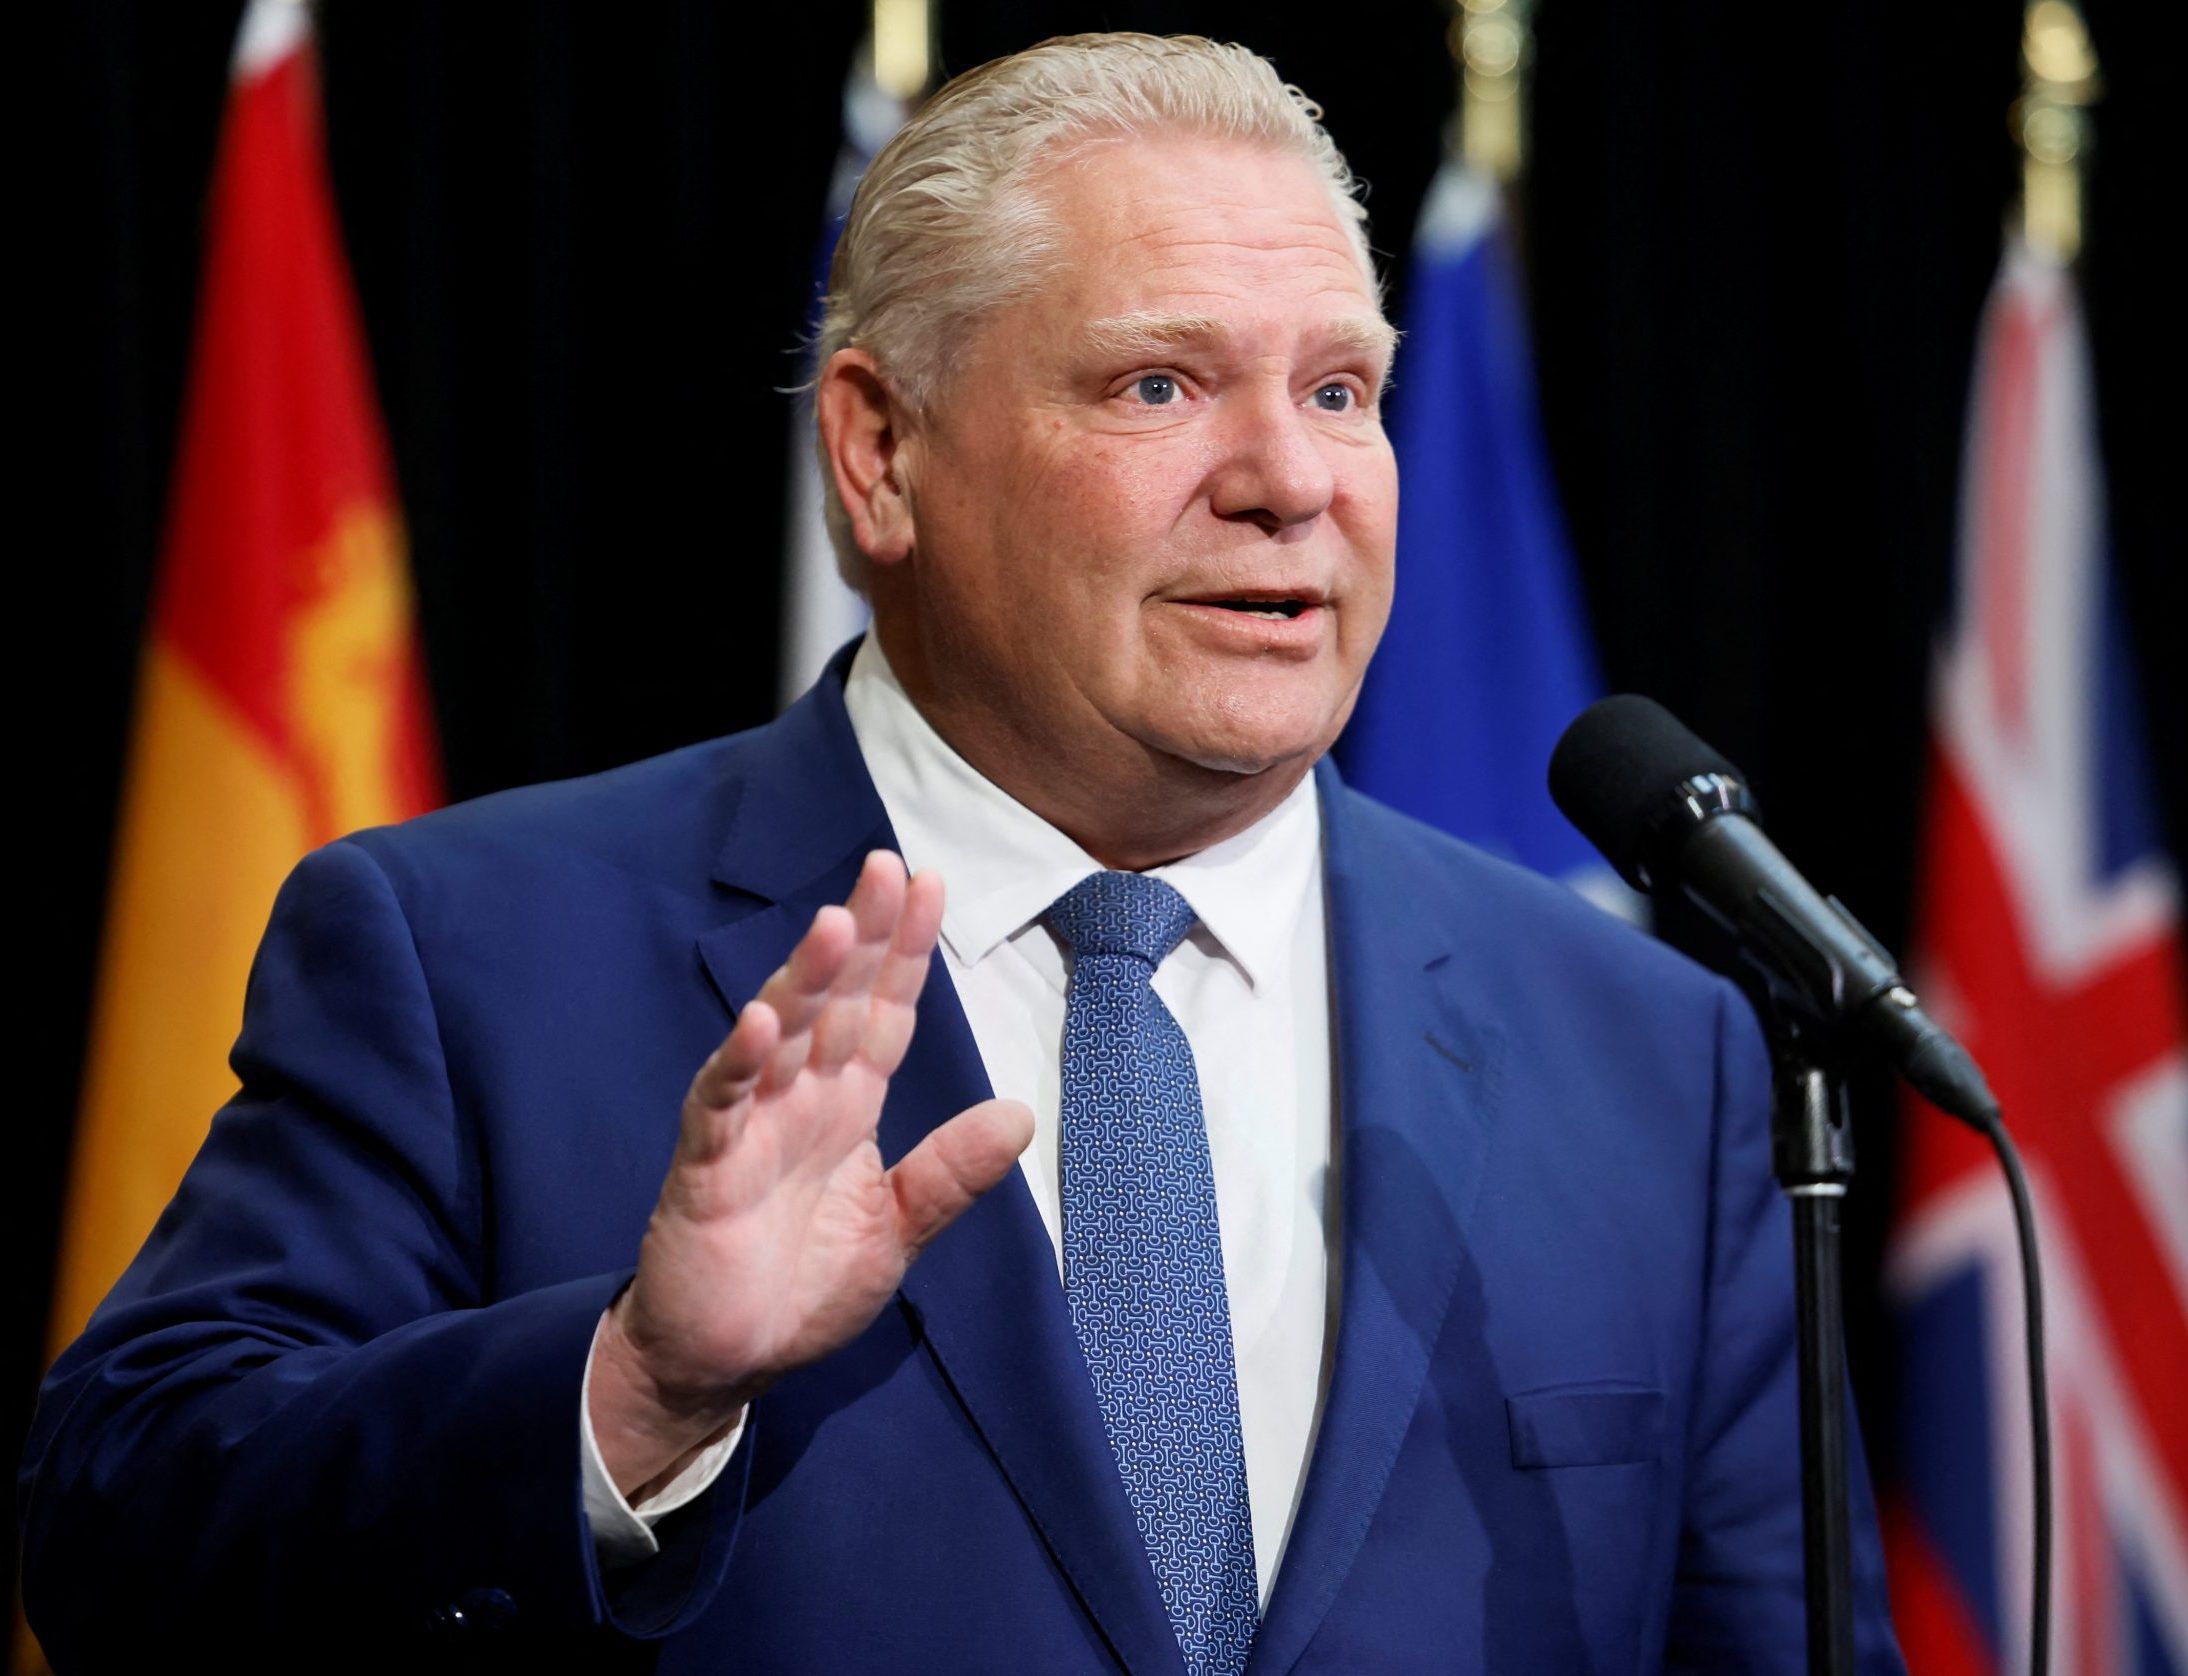 Ontario premier expects to ink health care deal with feds Toronto